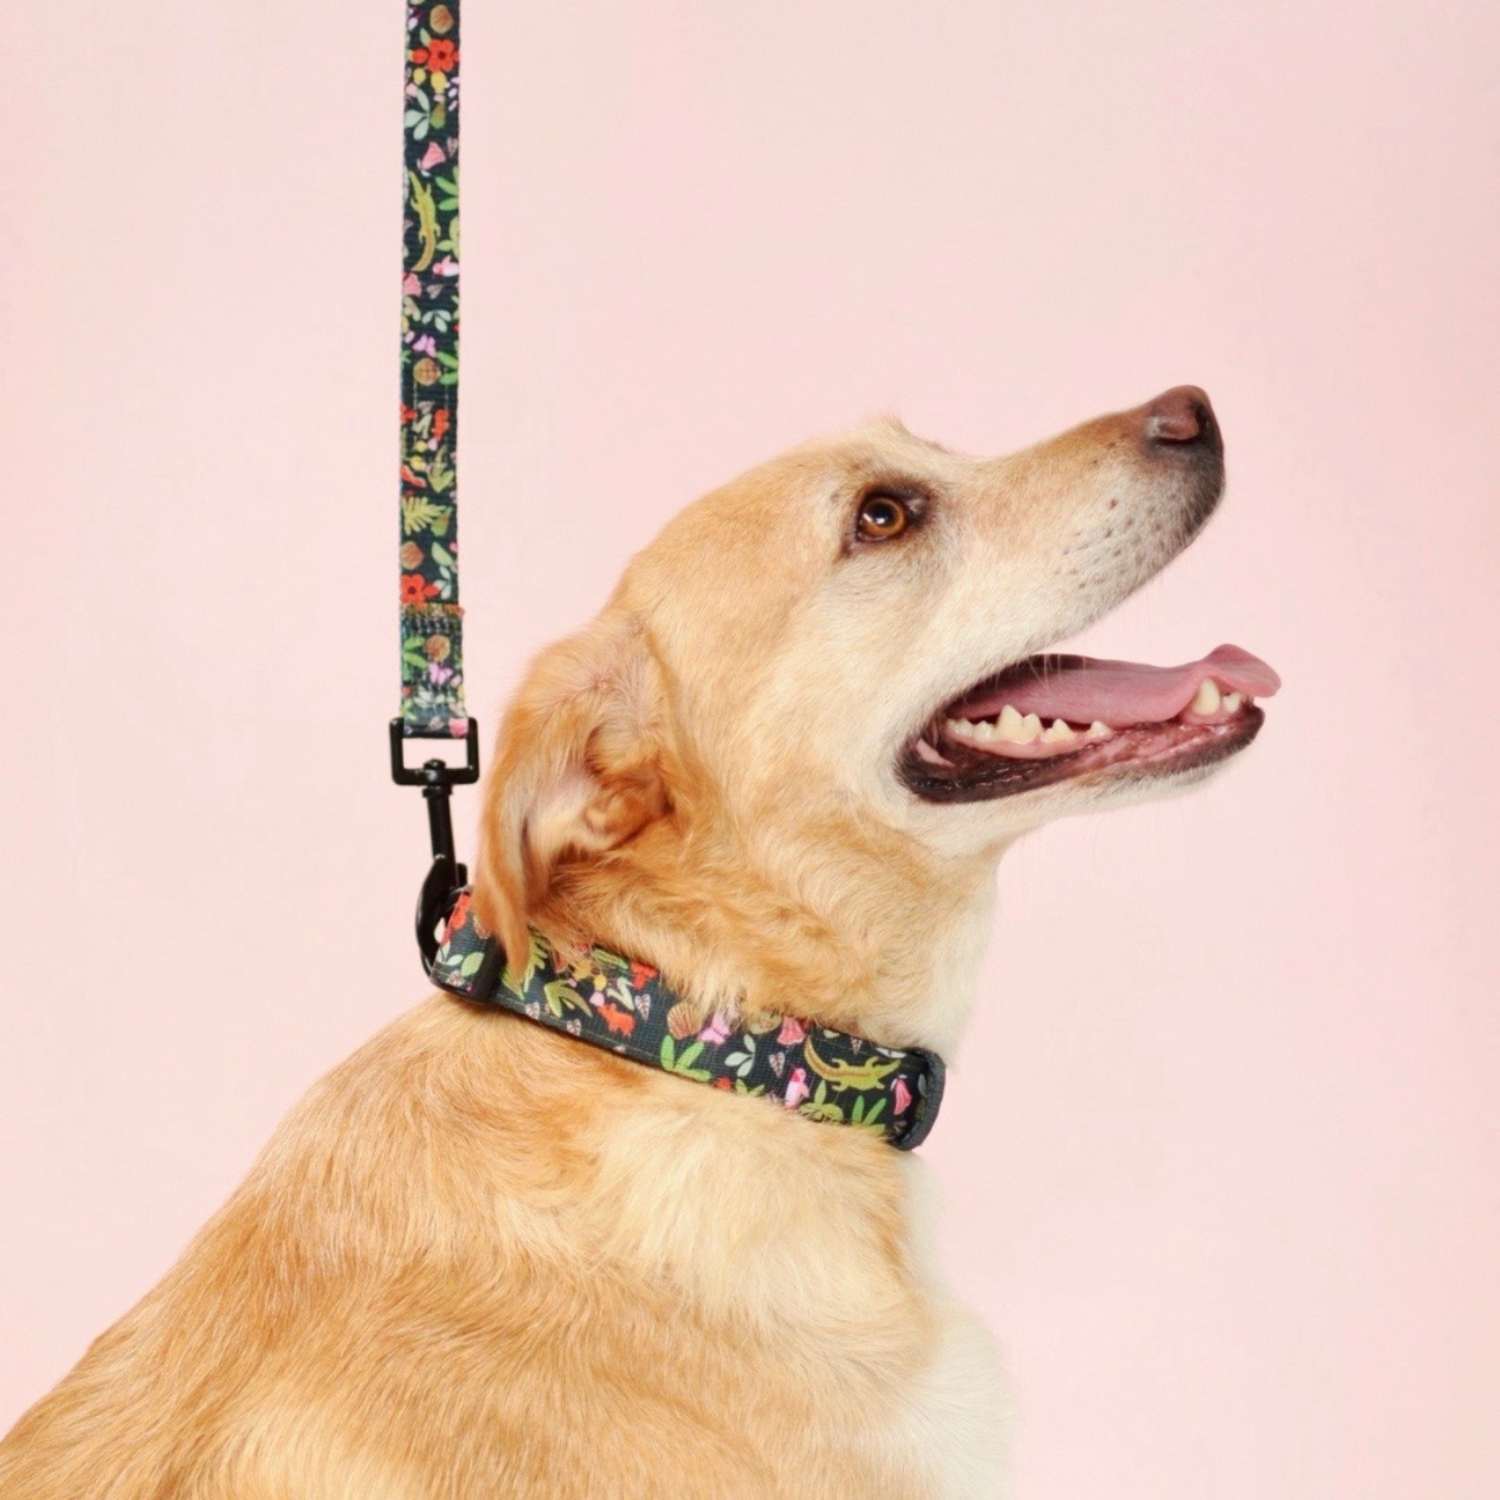 Tokio, rescue dog, wearing Pata Paw x Holalola leash and collar in a size L